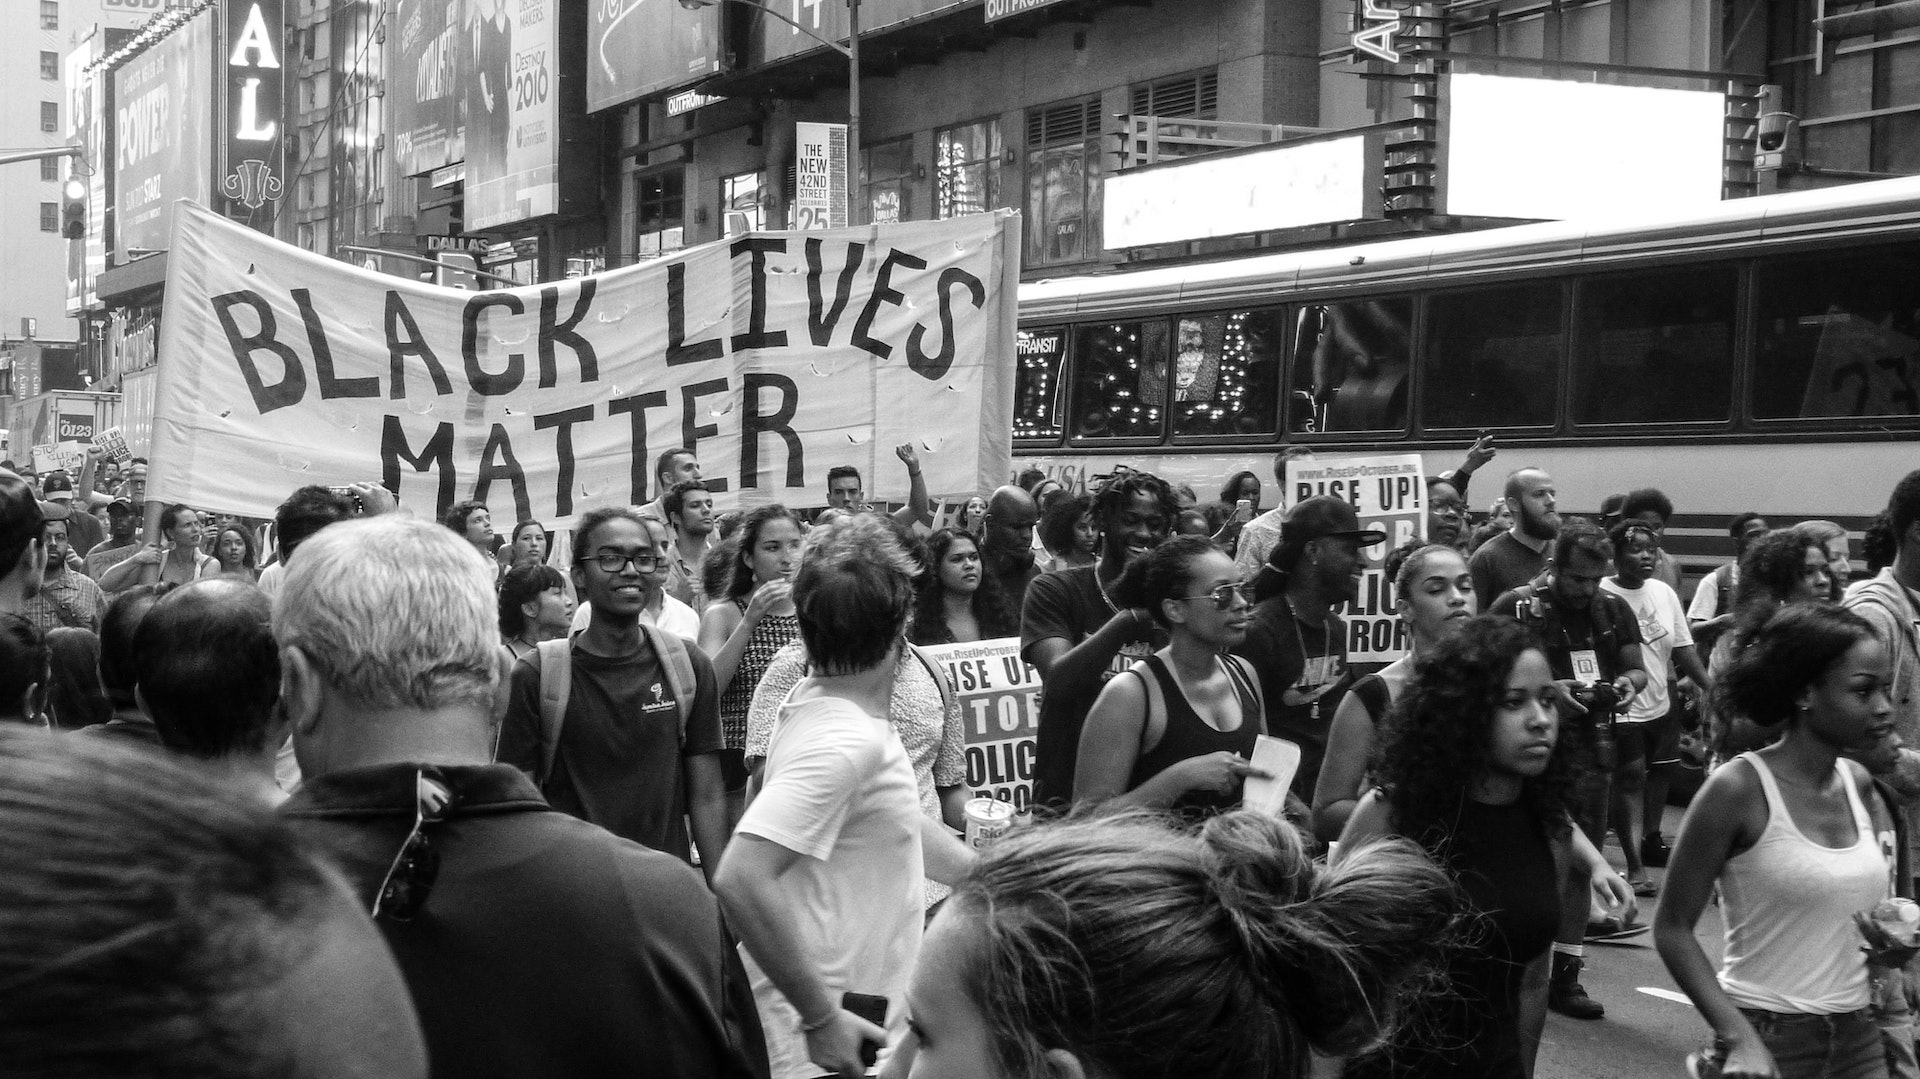 people protesting in the black lives matter movement